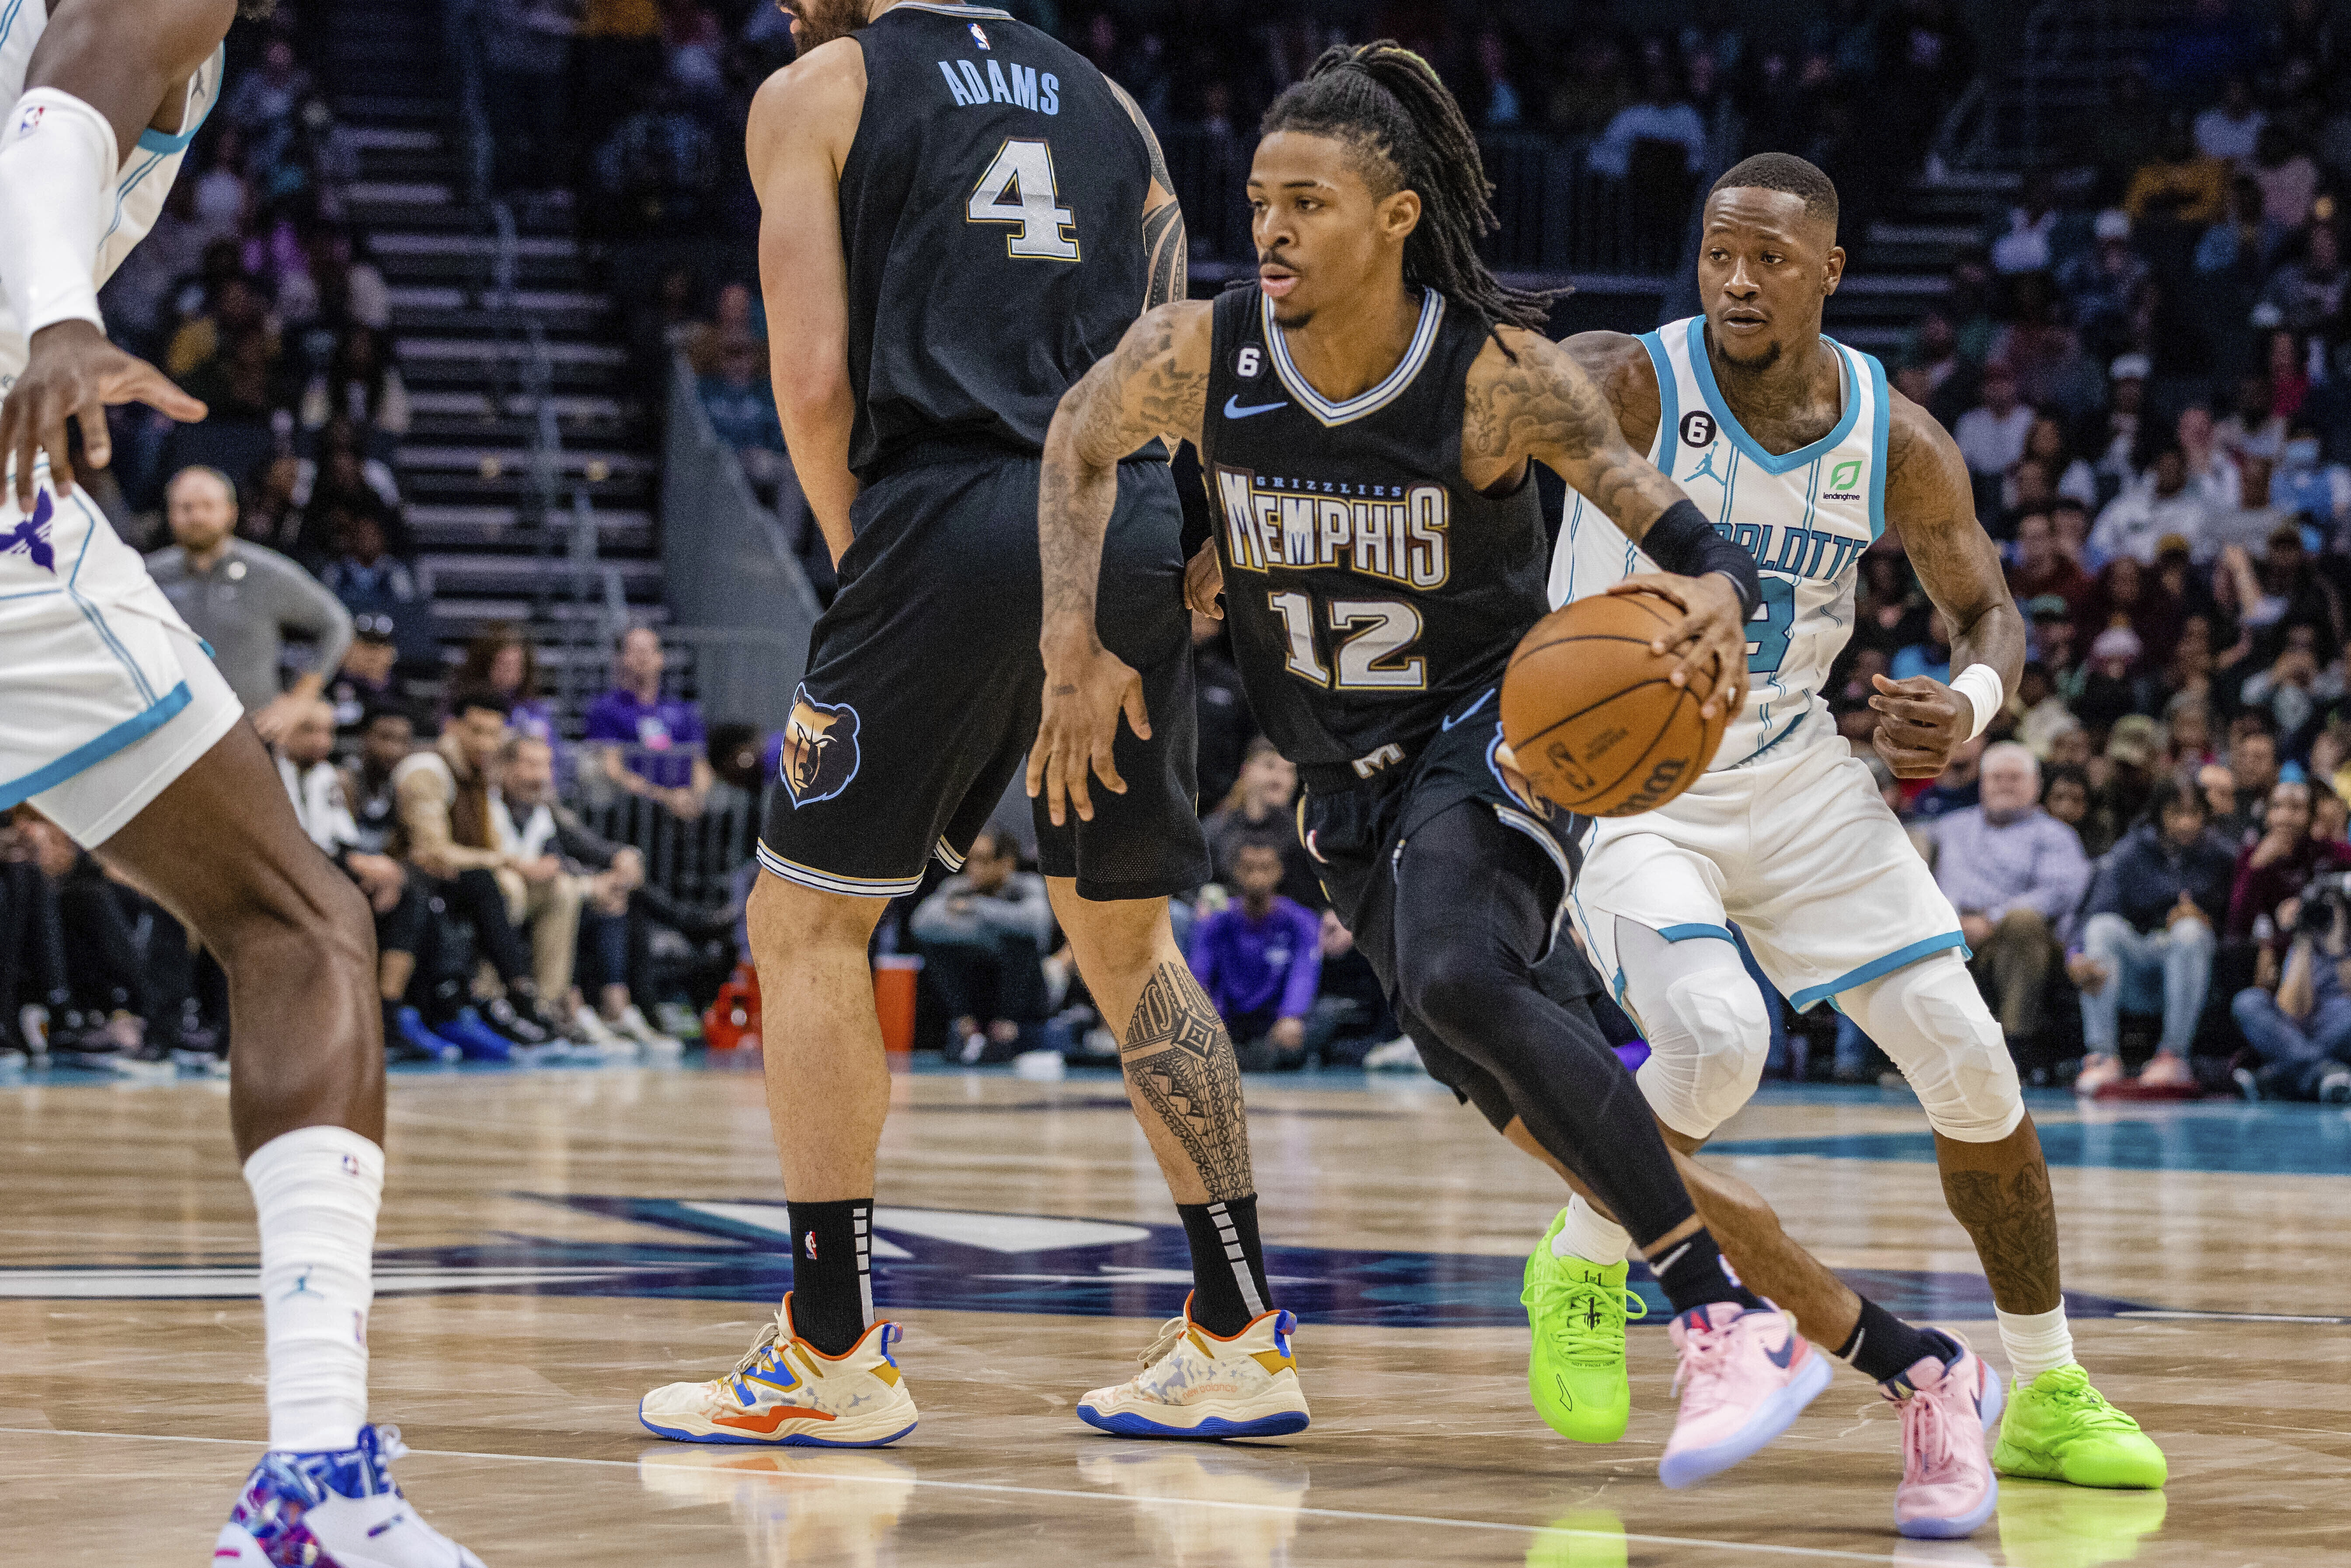 Memphis Grizzlies guard Ja Morant uses a screen from center Steve Adams to get past Charlotte Hornets guard Terry Rozier in a game on Wednesday, Jan. 4, 2023. (AP Photo/Scott Kinser)